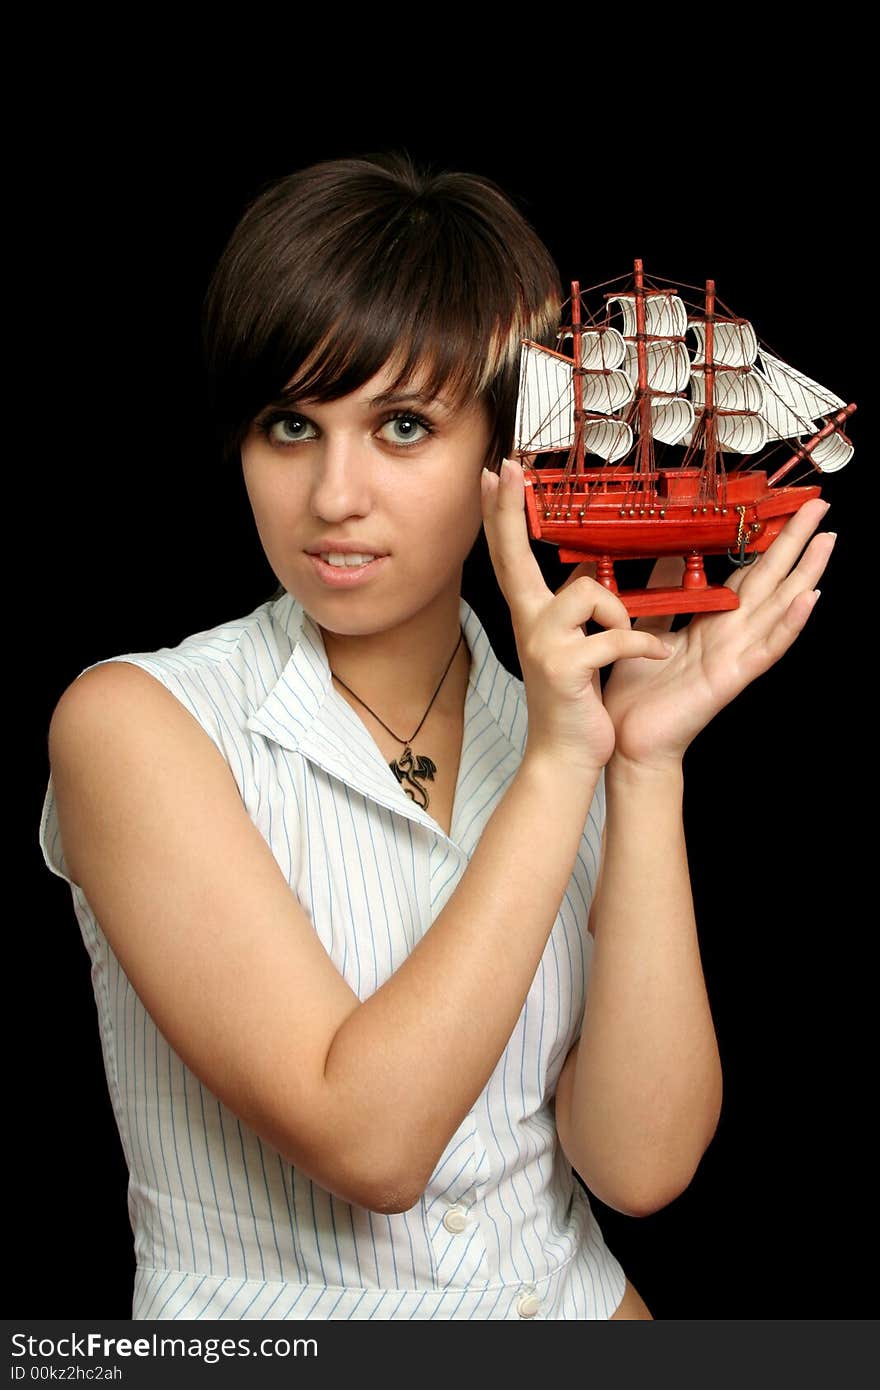 The nice girl with the toy ship in a hand, isolated on black background